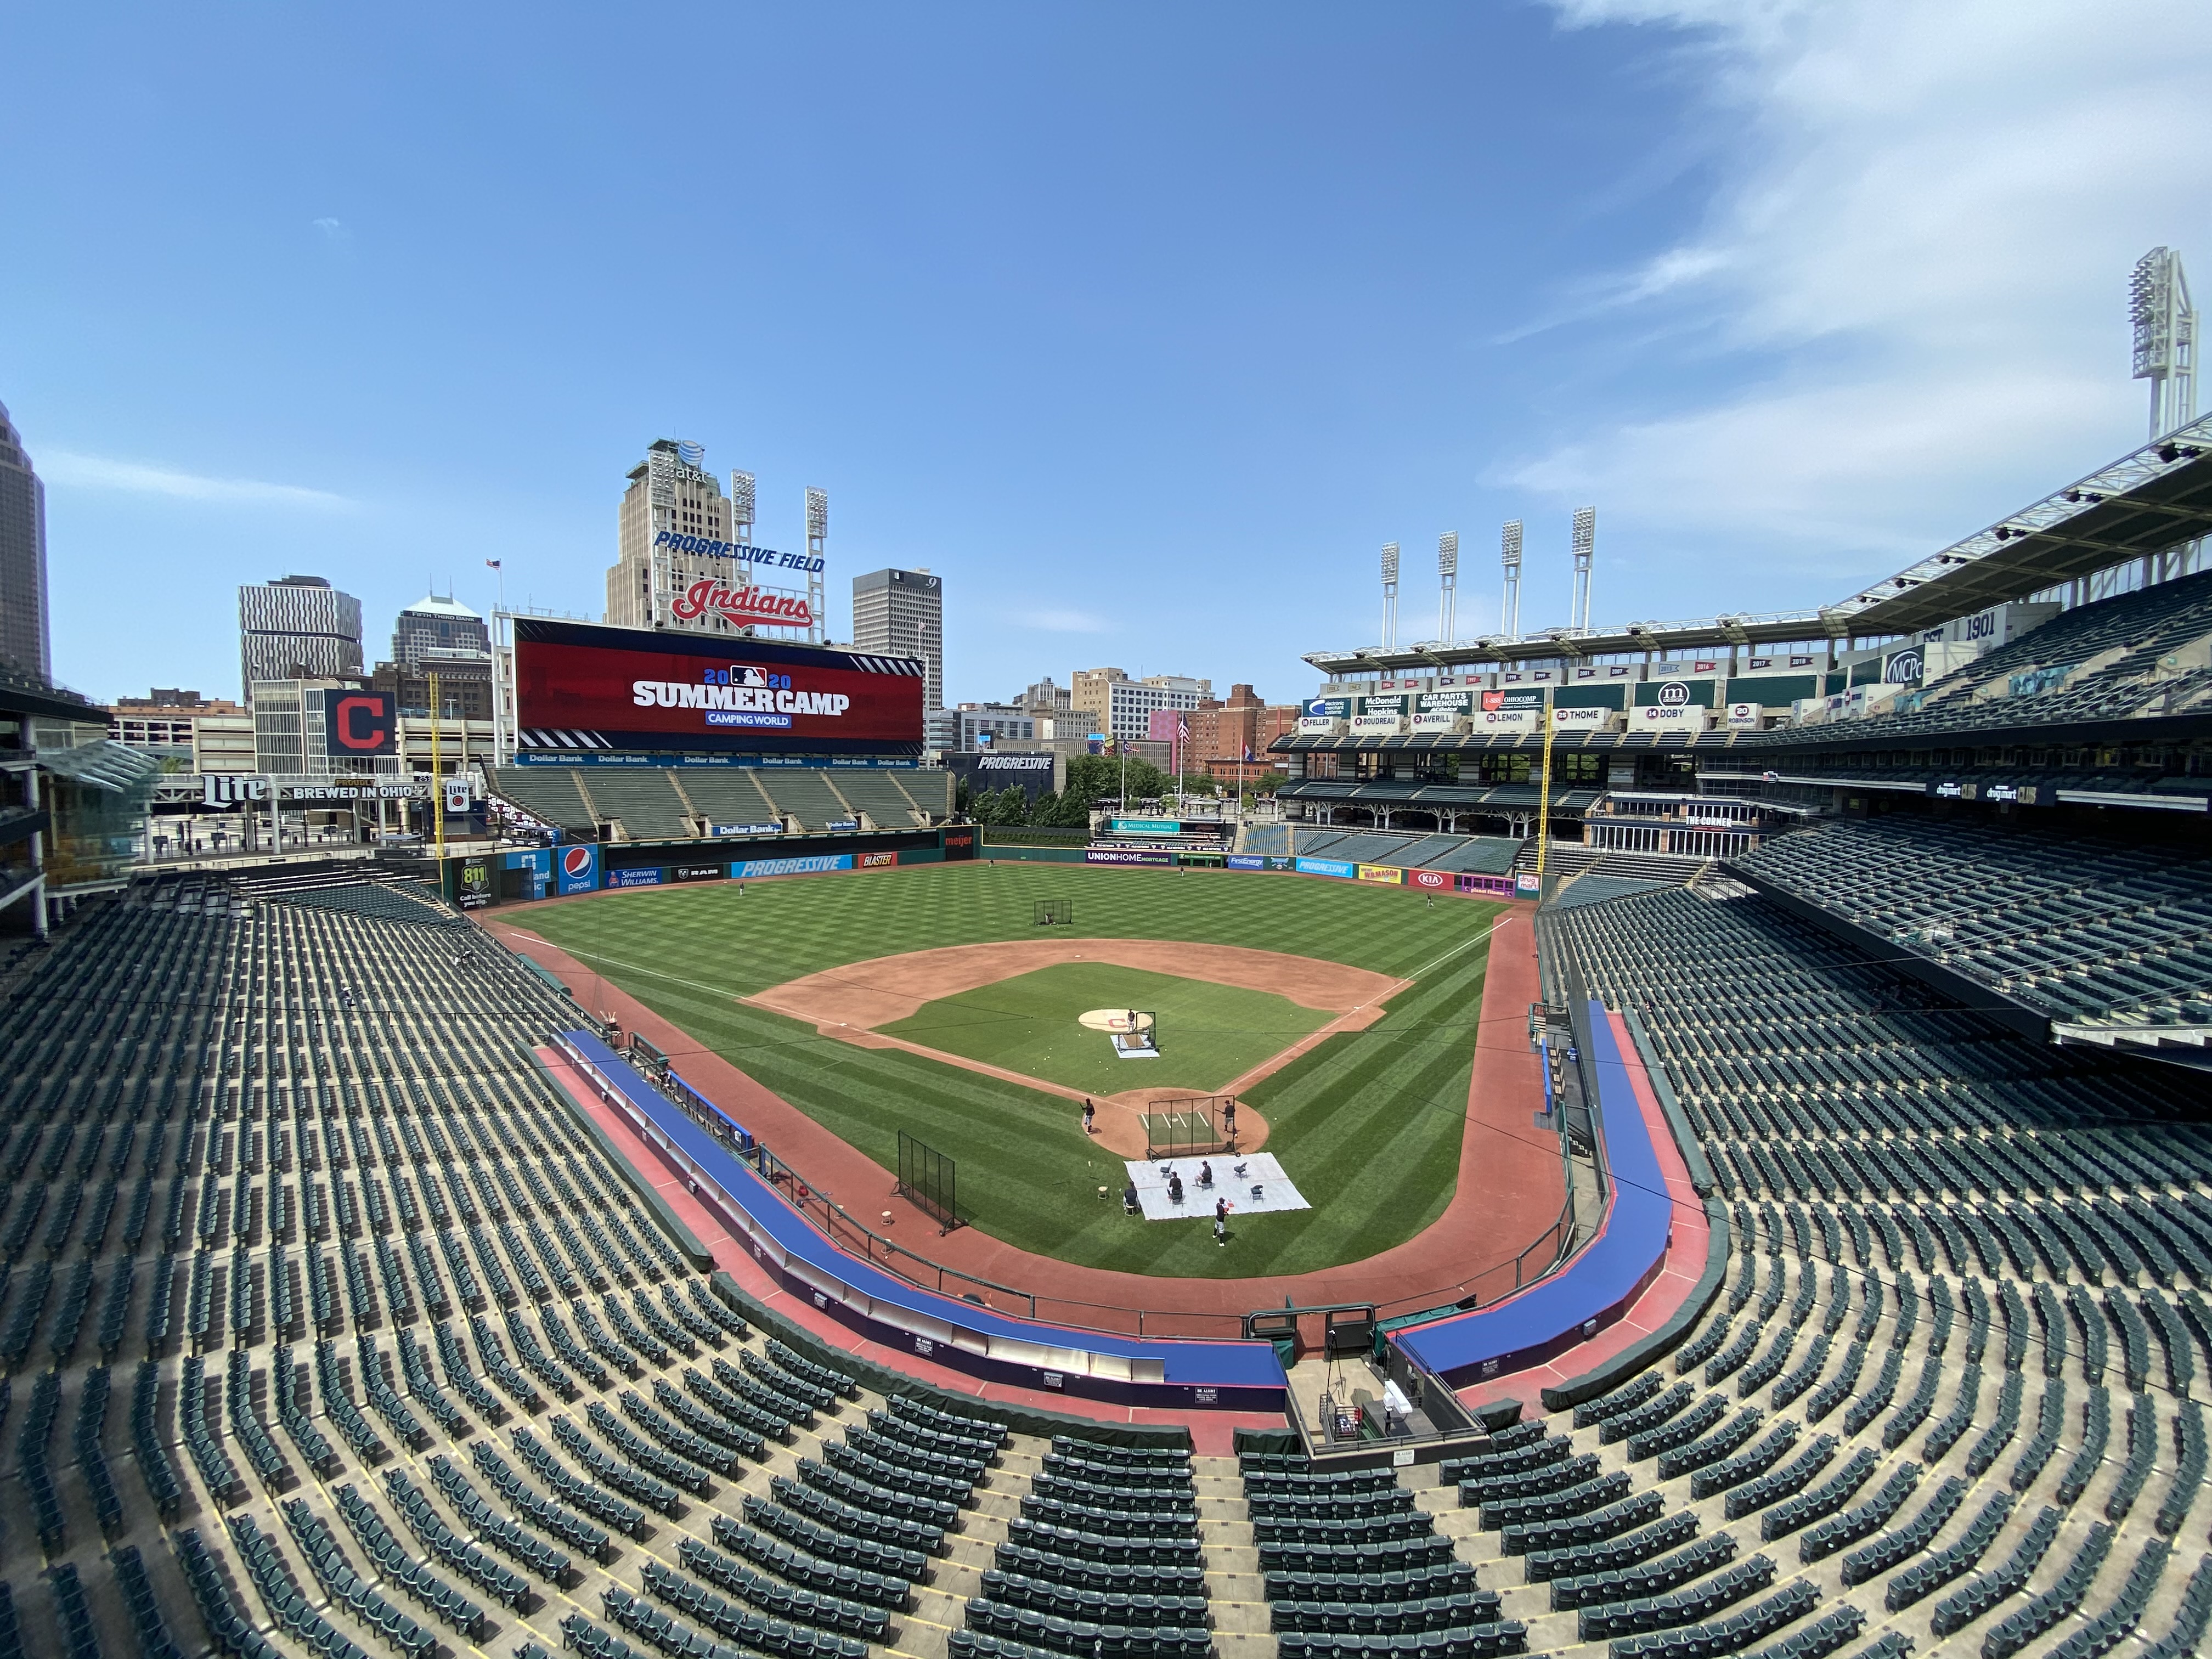 What's new with the Cleveland Indians, the Pirates' next opponent